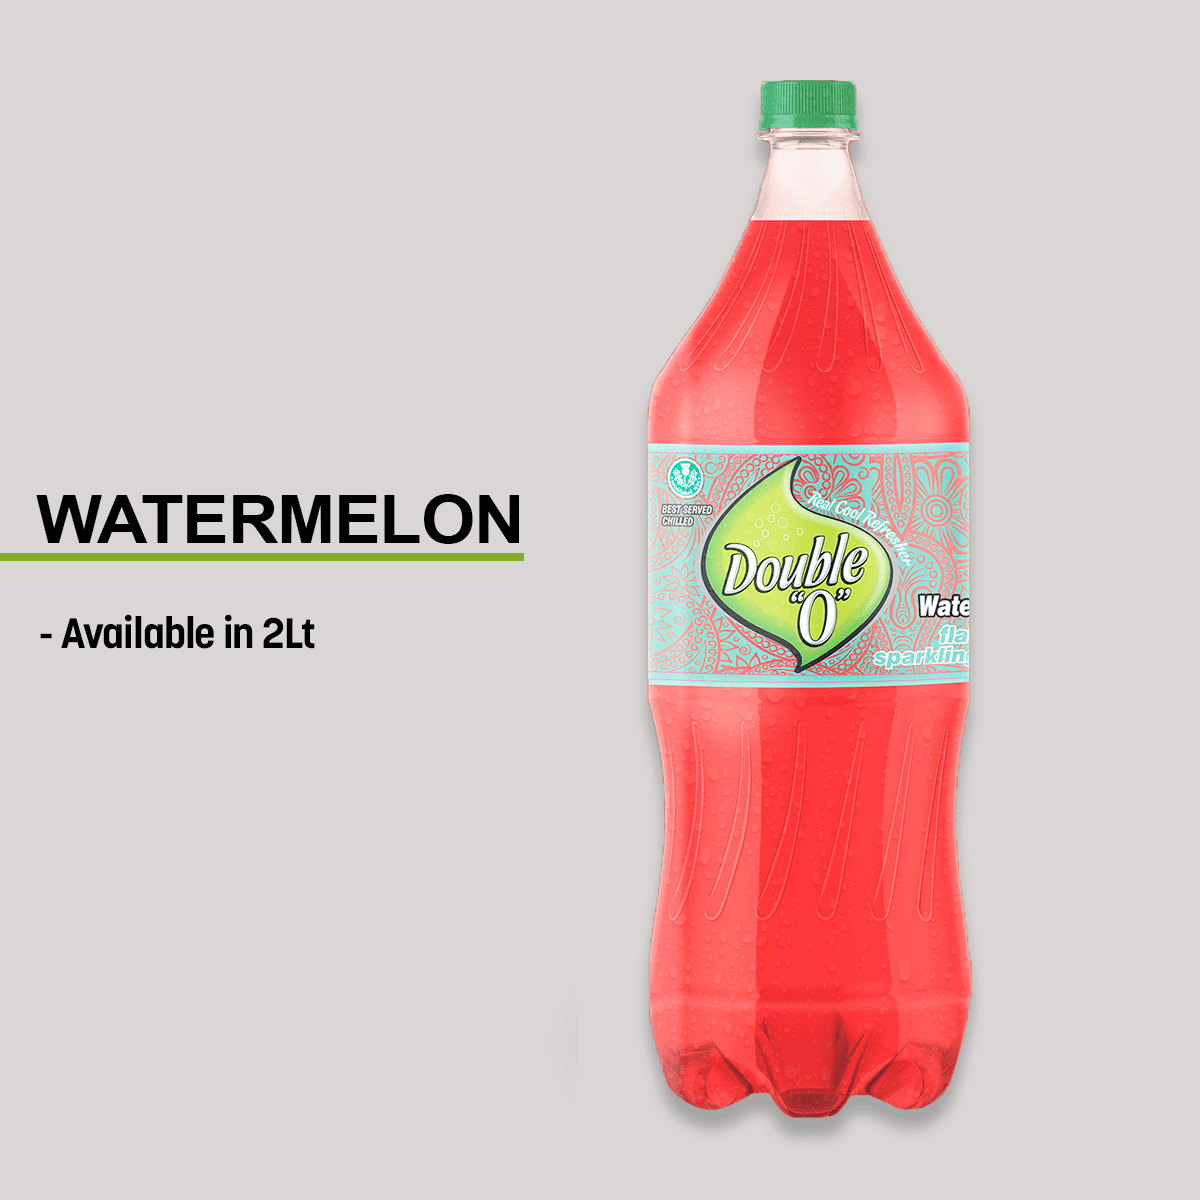 WATERMELON for Website - aifx 080223 - Double “O”